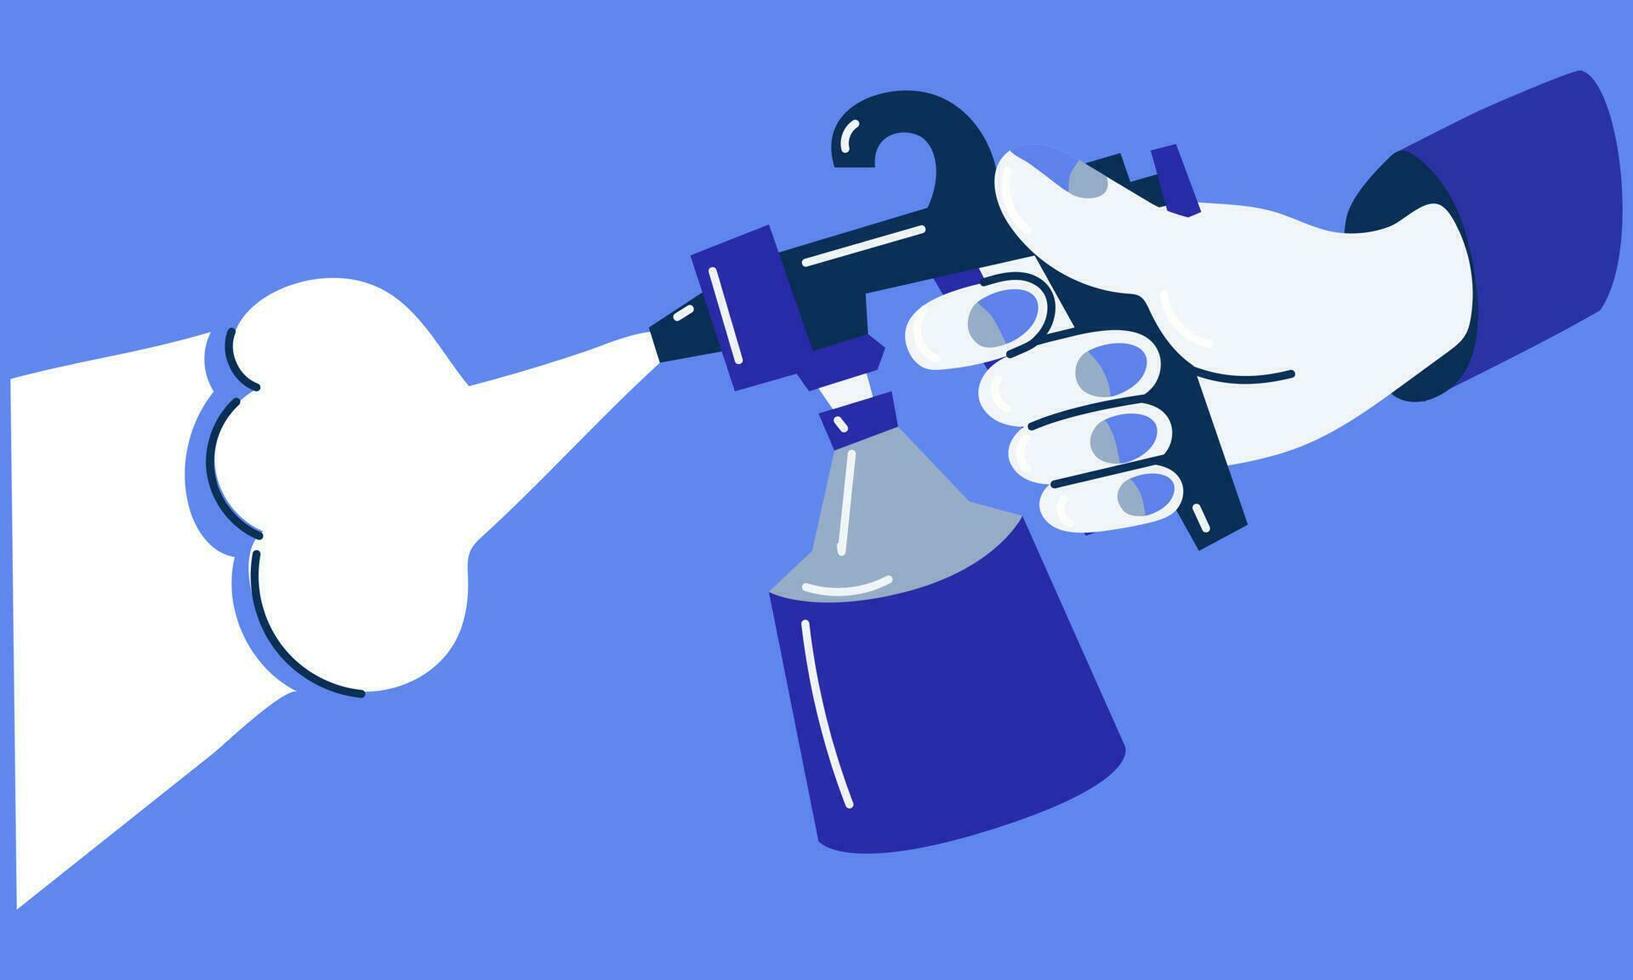 Illustration to the theme of painting cars in a car service station, spraying paint. The icon or logo of the spraying tool. Cartoon logo of airbrushing painting. Spray on the surface with a tool Salon vector